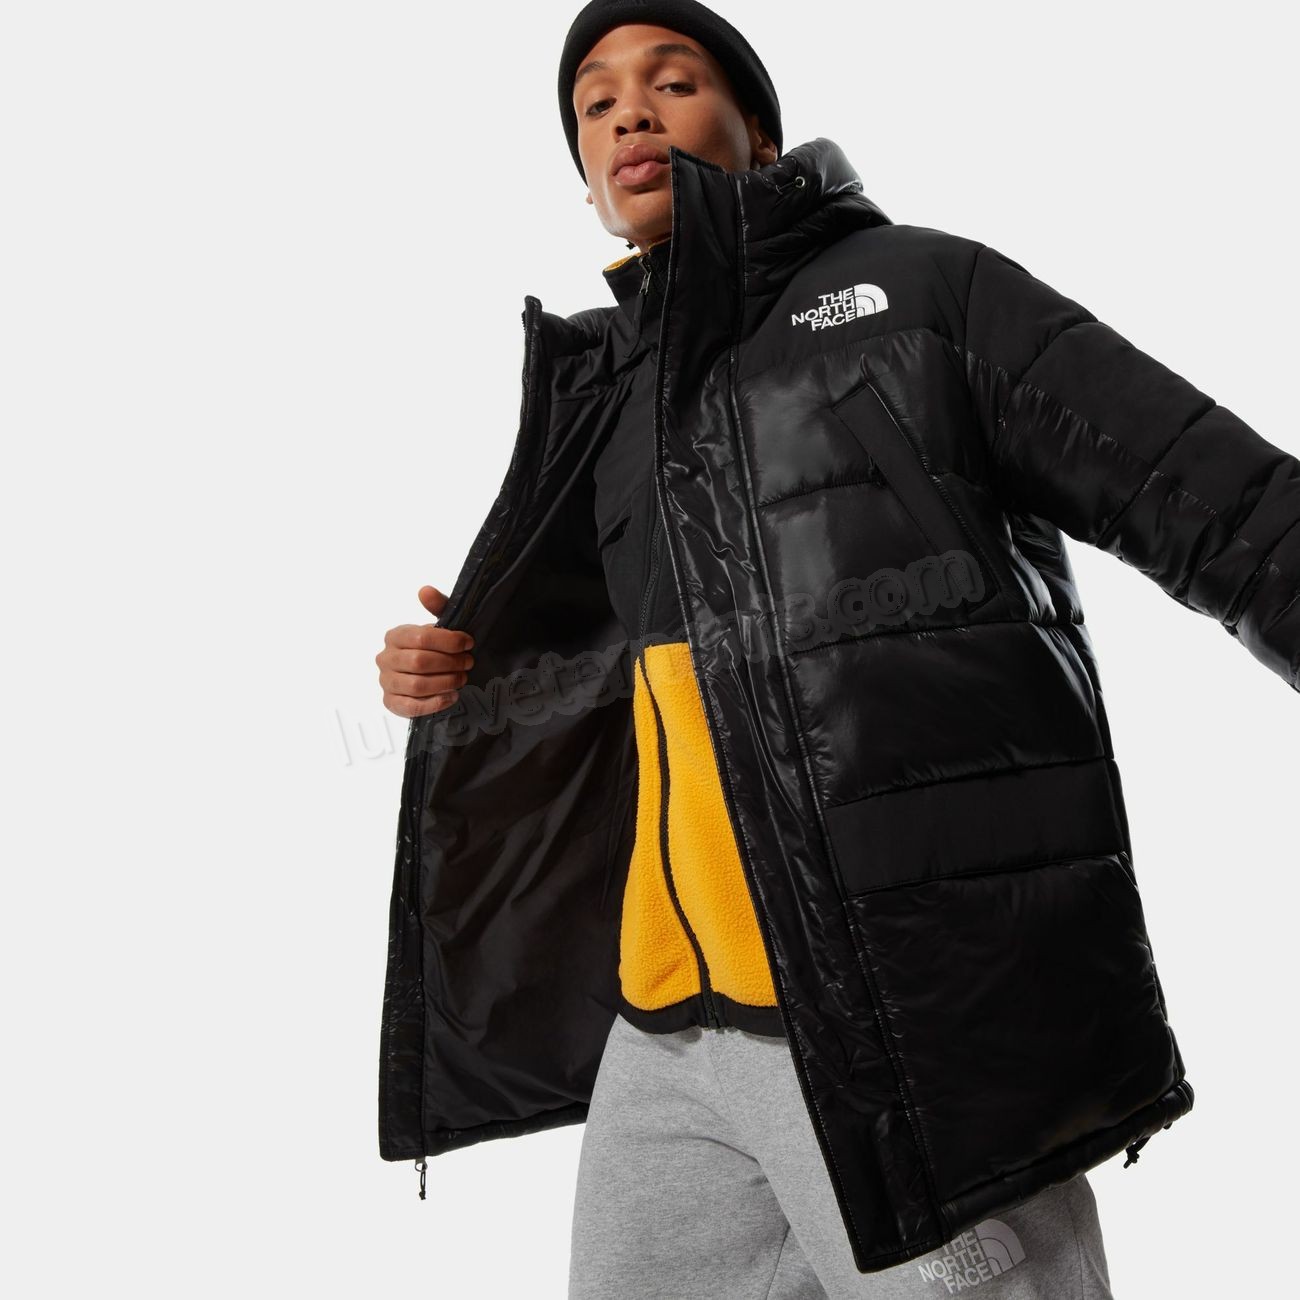 The North Face-mode homme THE NORTH FACE Himalayan Insulated Parka Vente en ligne - The North Face-mode homme THE NORTH FACE Himalayan Insulated Parka Vente en ligne